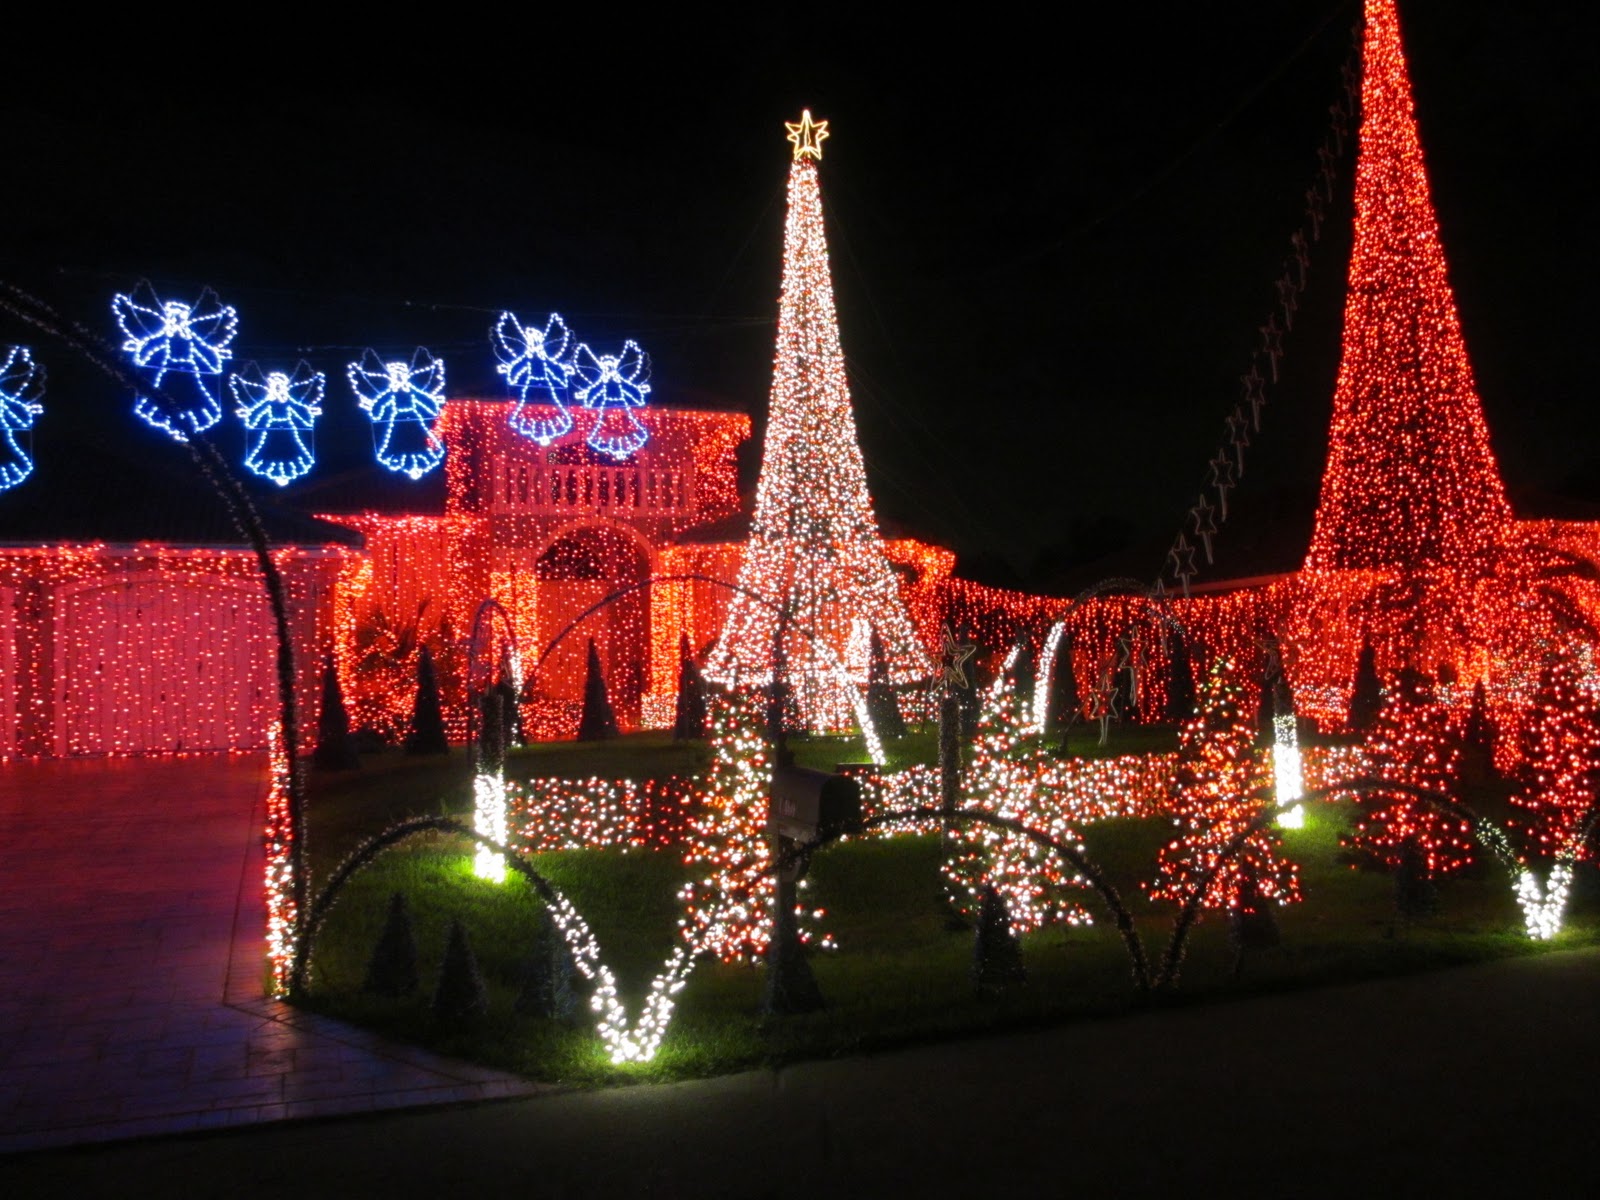 Places to see Beautiful Christmas Lights in South Florida